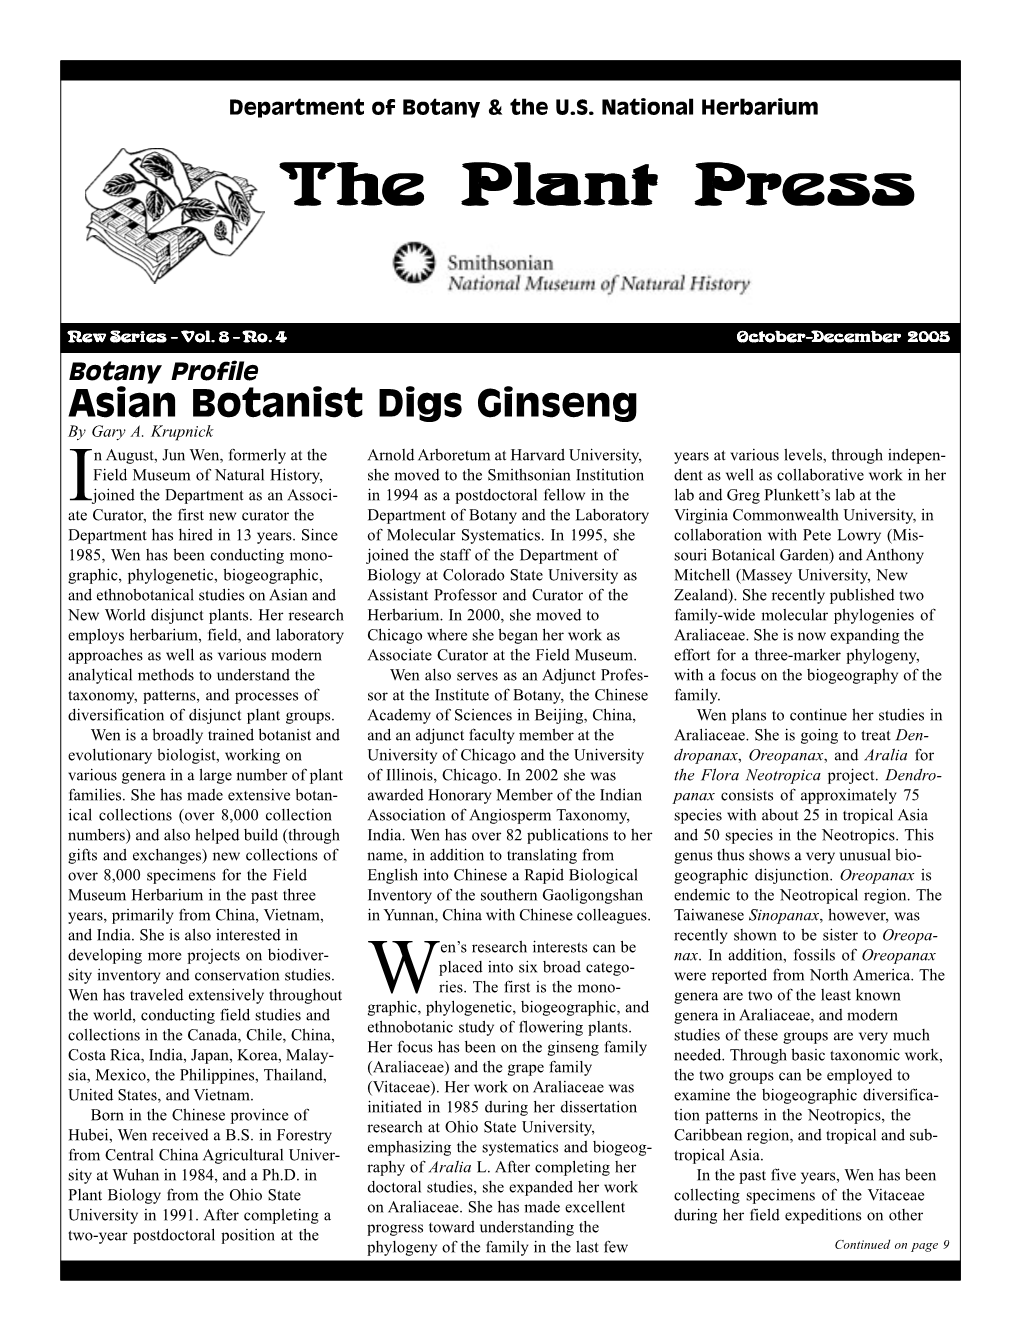 2005 Vol. 8, Issue 4